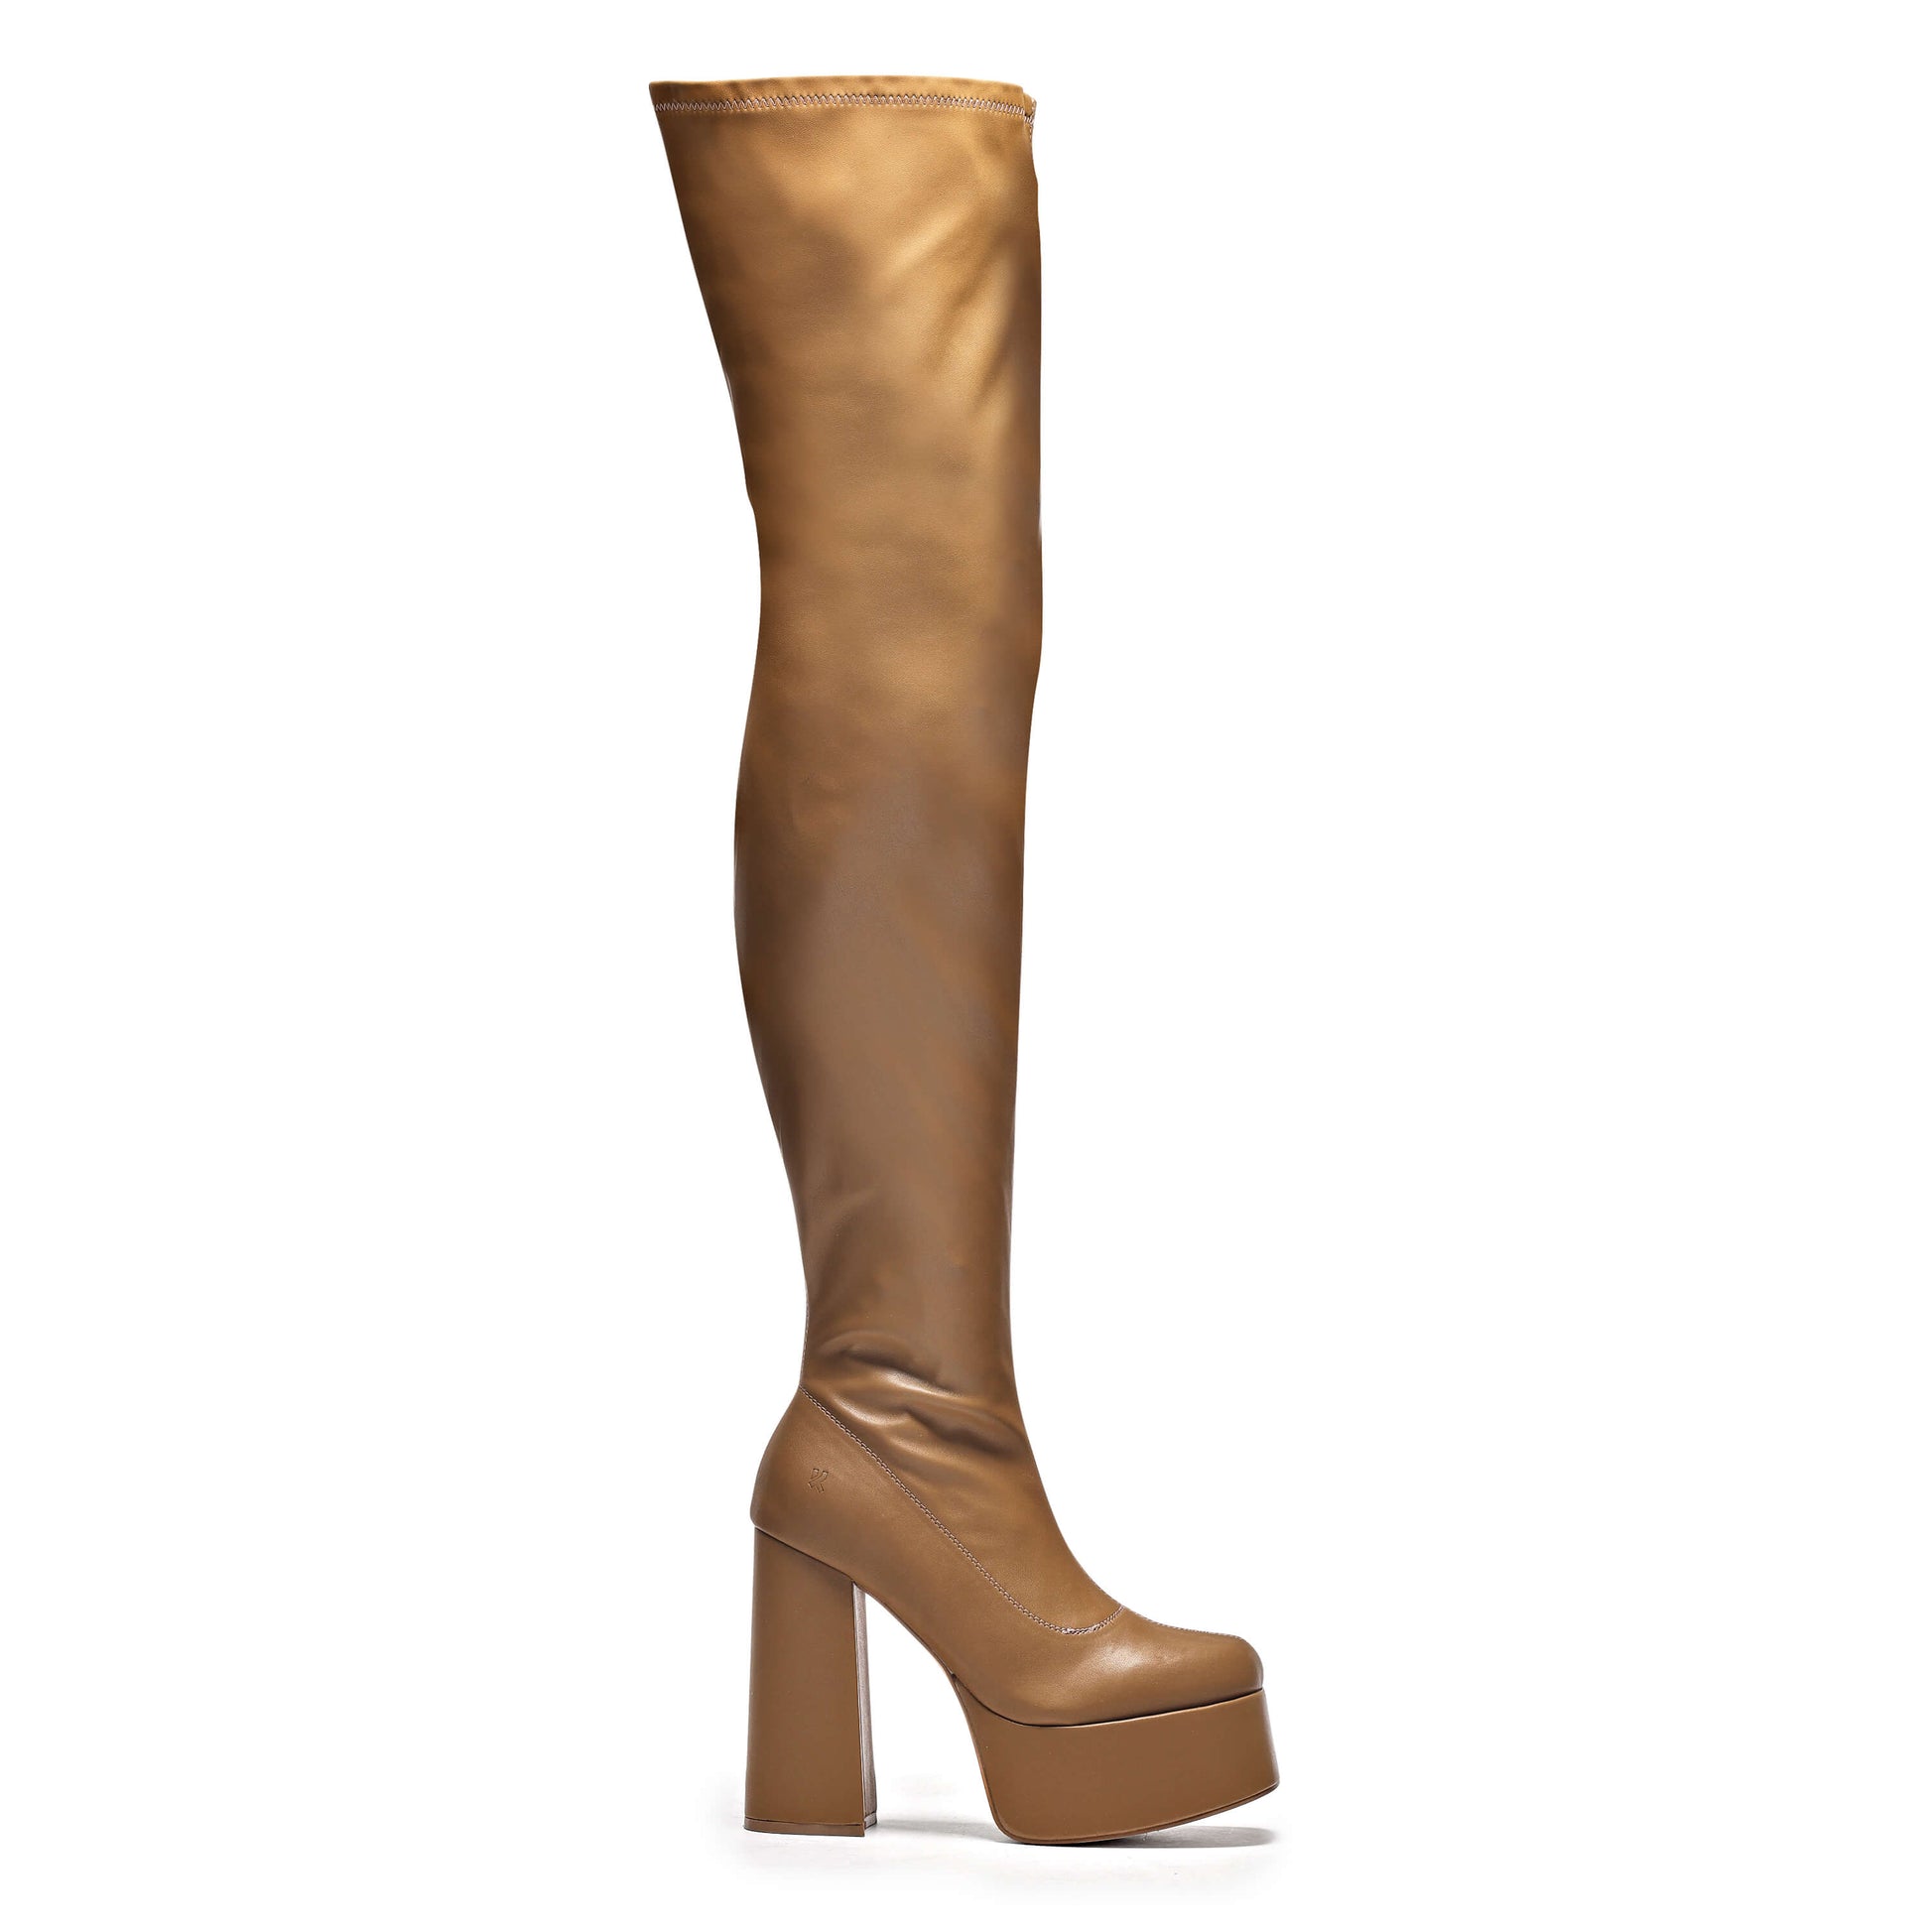 The Redemption Plus Size Thigh High Boots - Khaki - Long Boots - KOI Footwear - Khaki - Side View